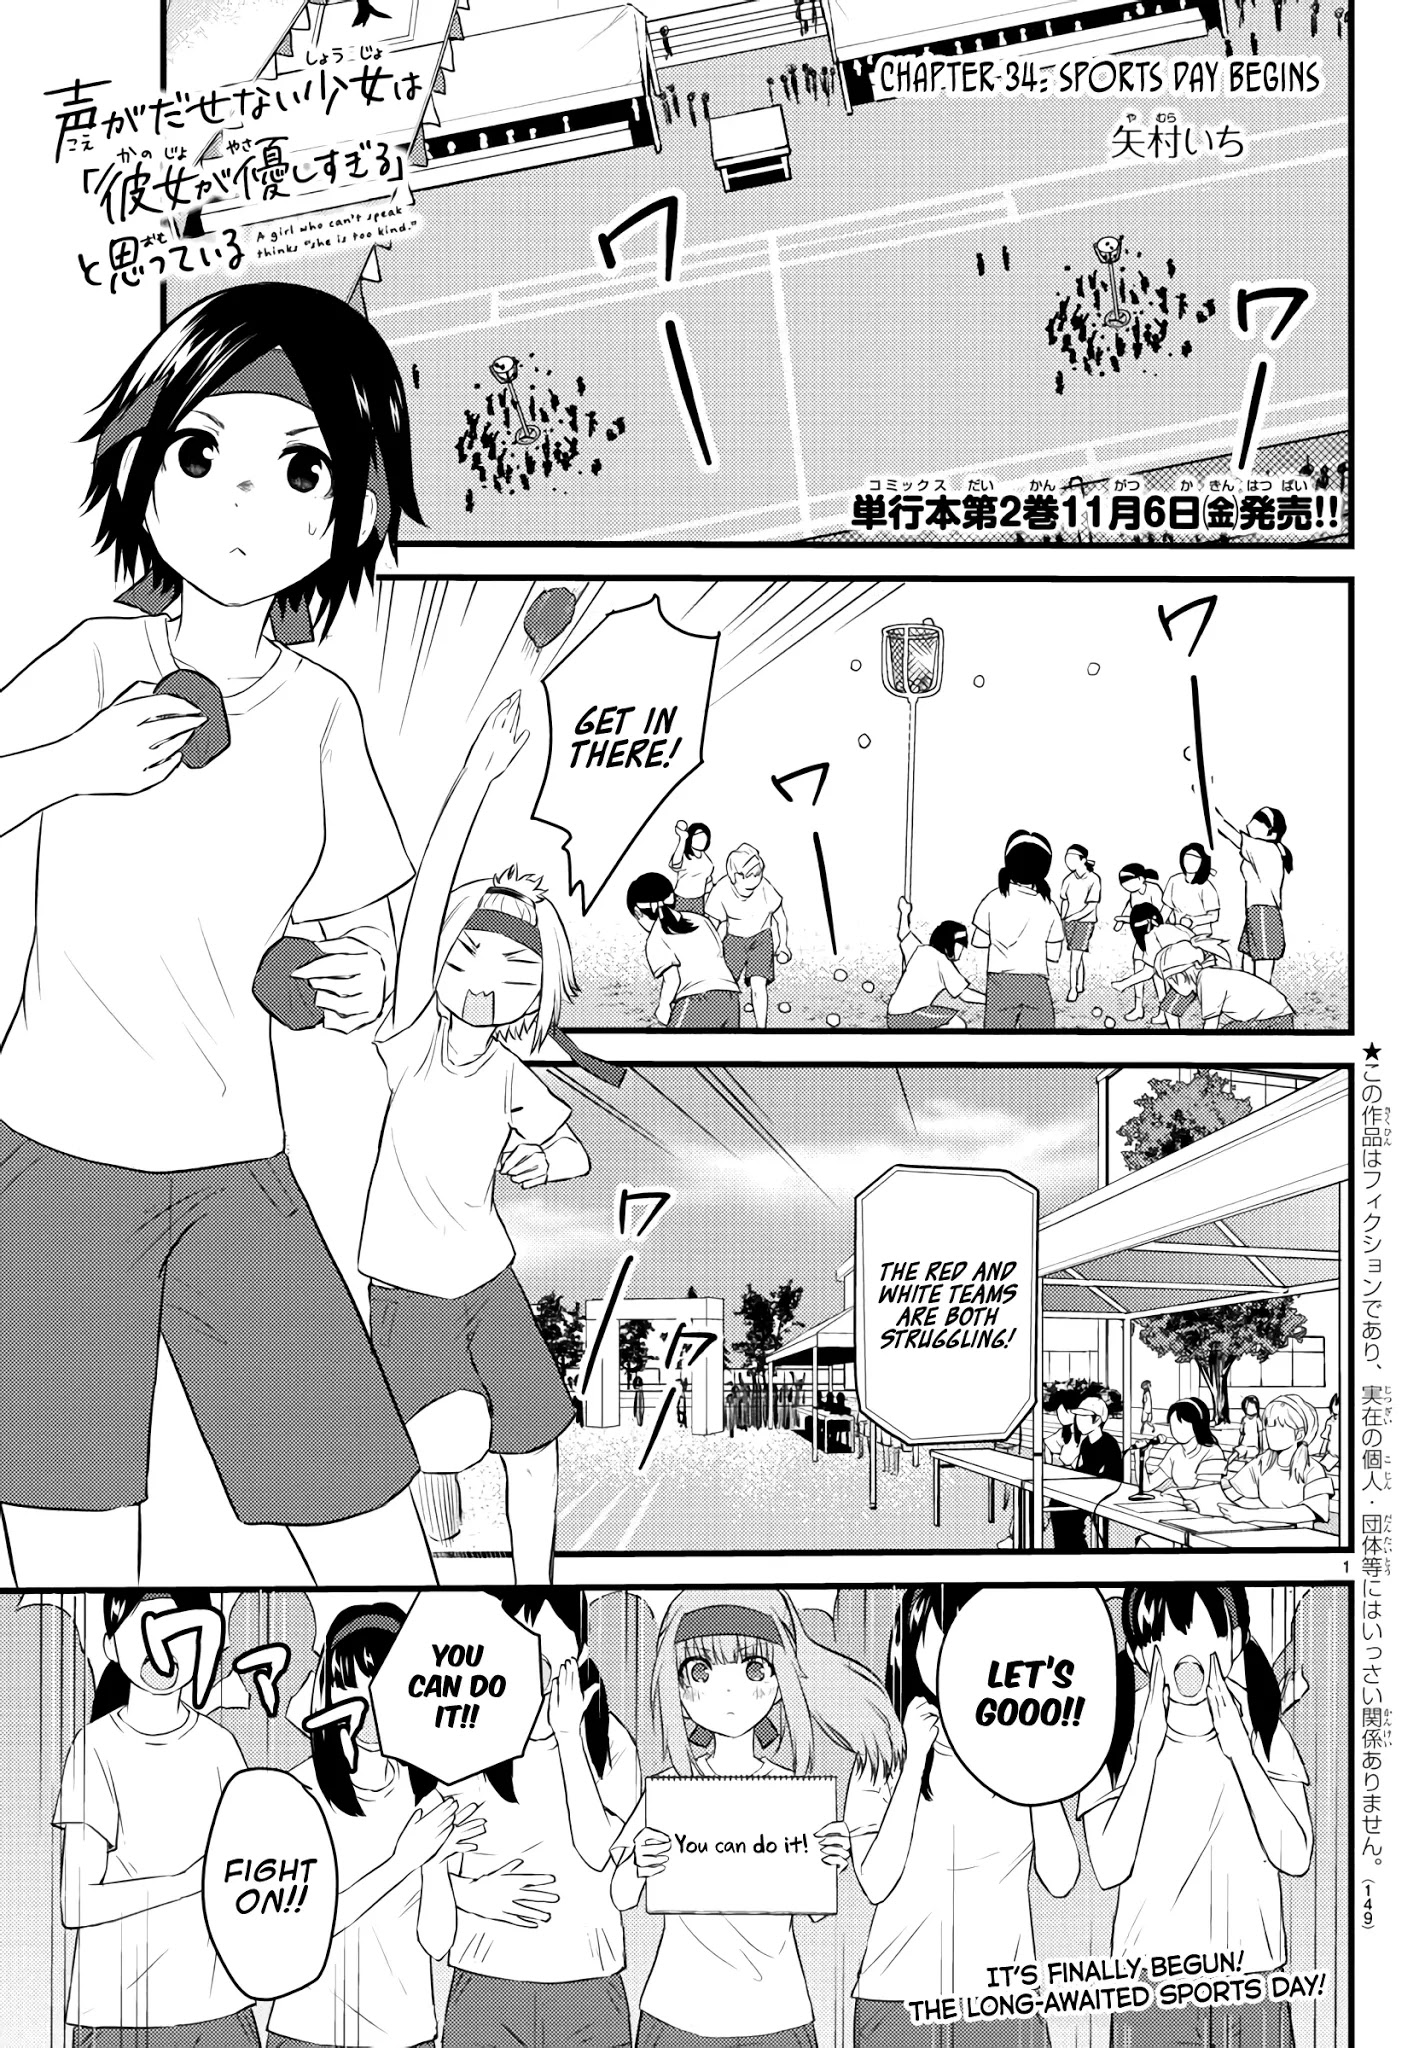 The Mute Girl And Her New Friend (Serialization) Chapter 34: Sports Day Begins - Picture 1